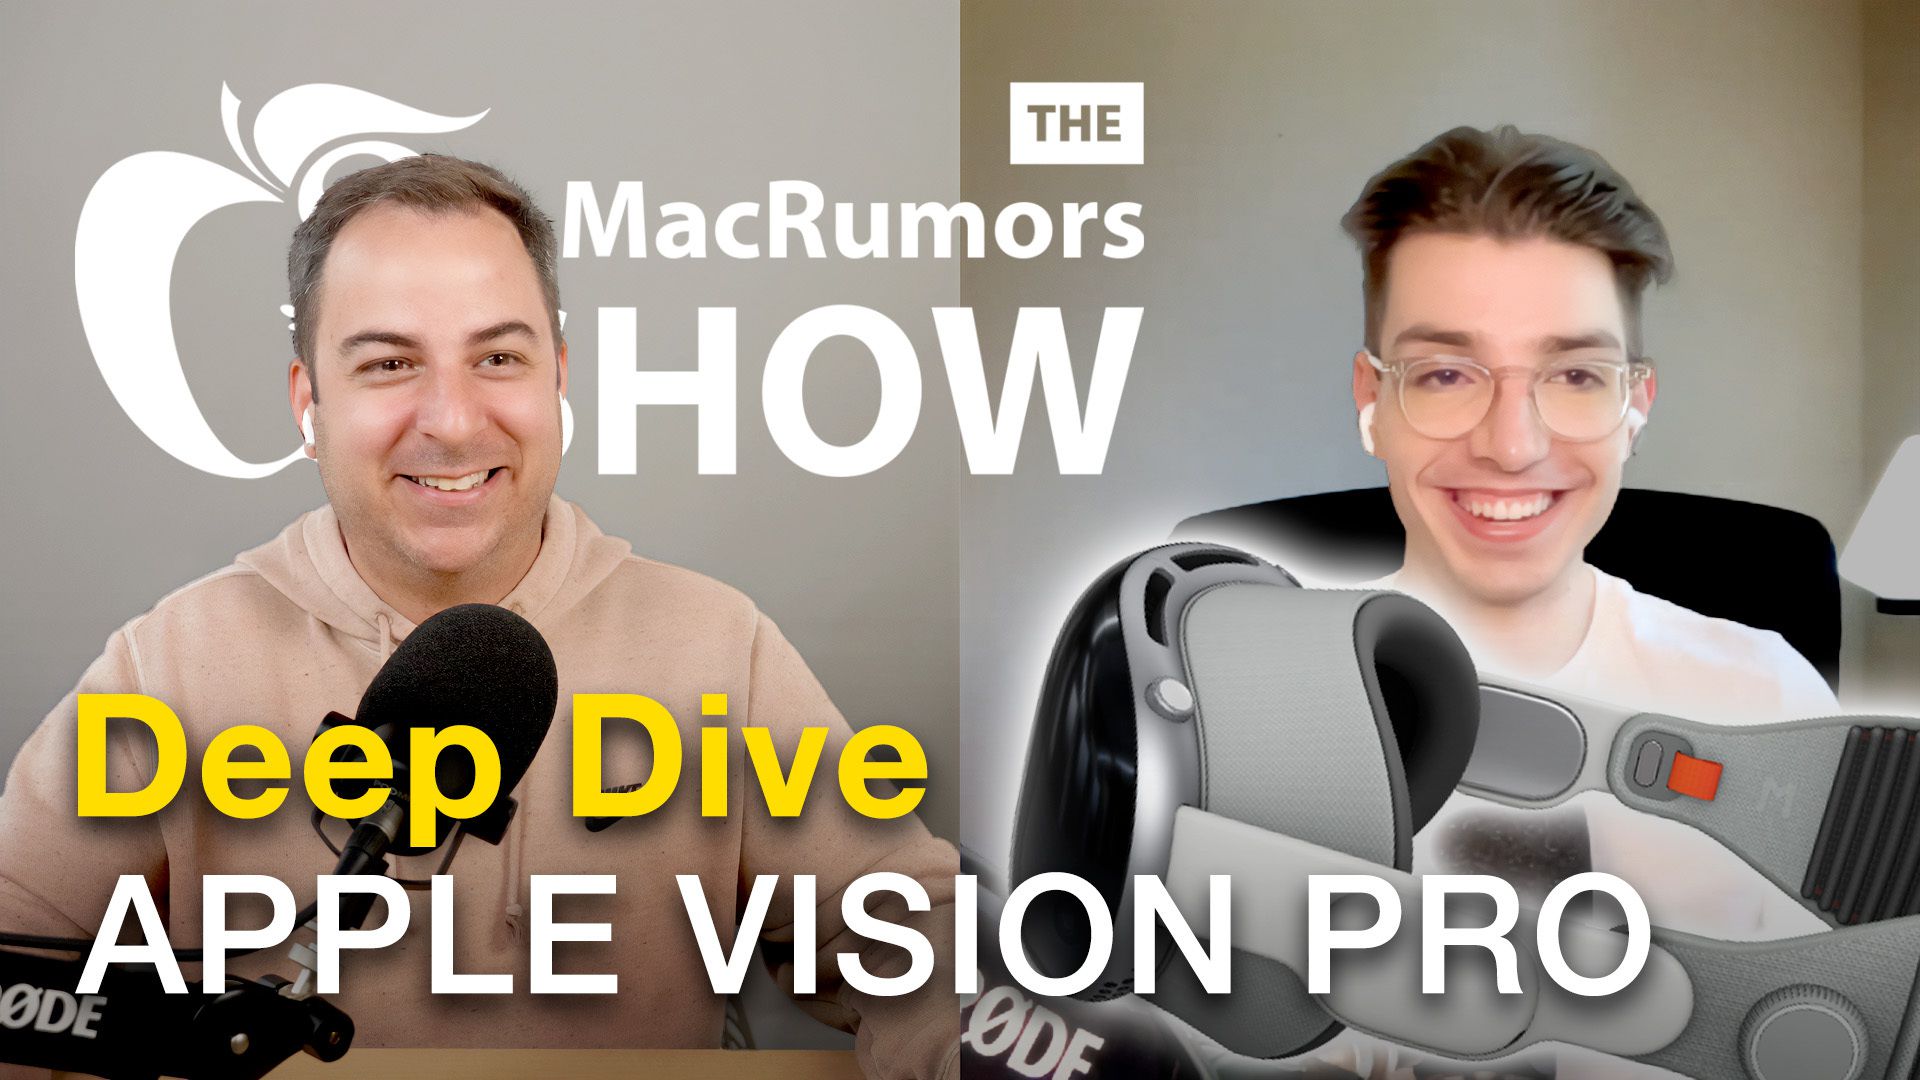 The Vision Pro: Revolutionizing Technology - A Deep Dive on The MacRumors Show